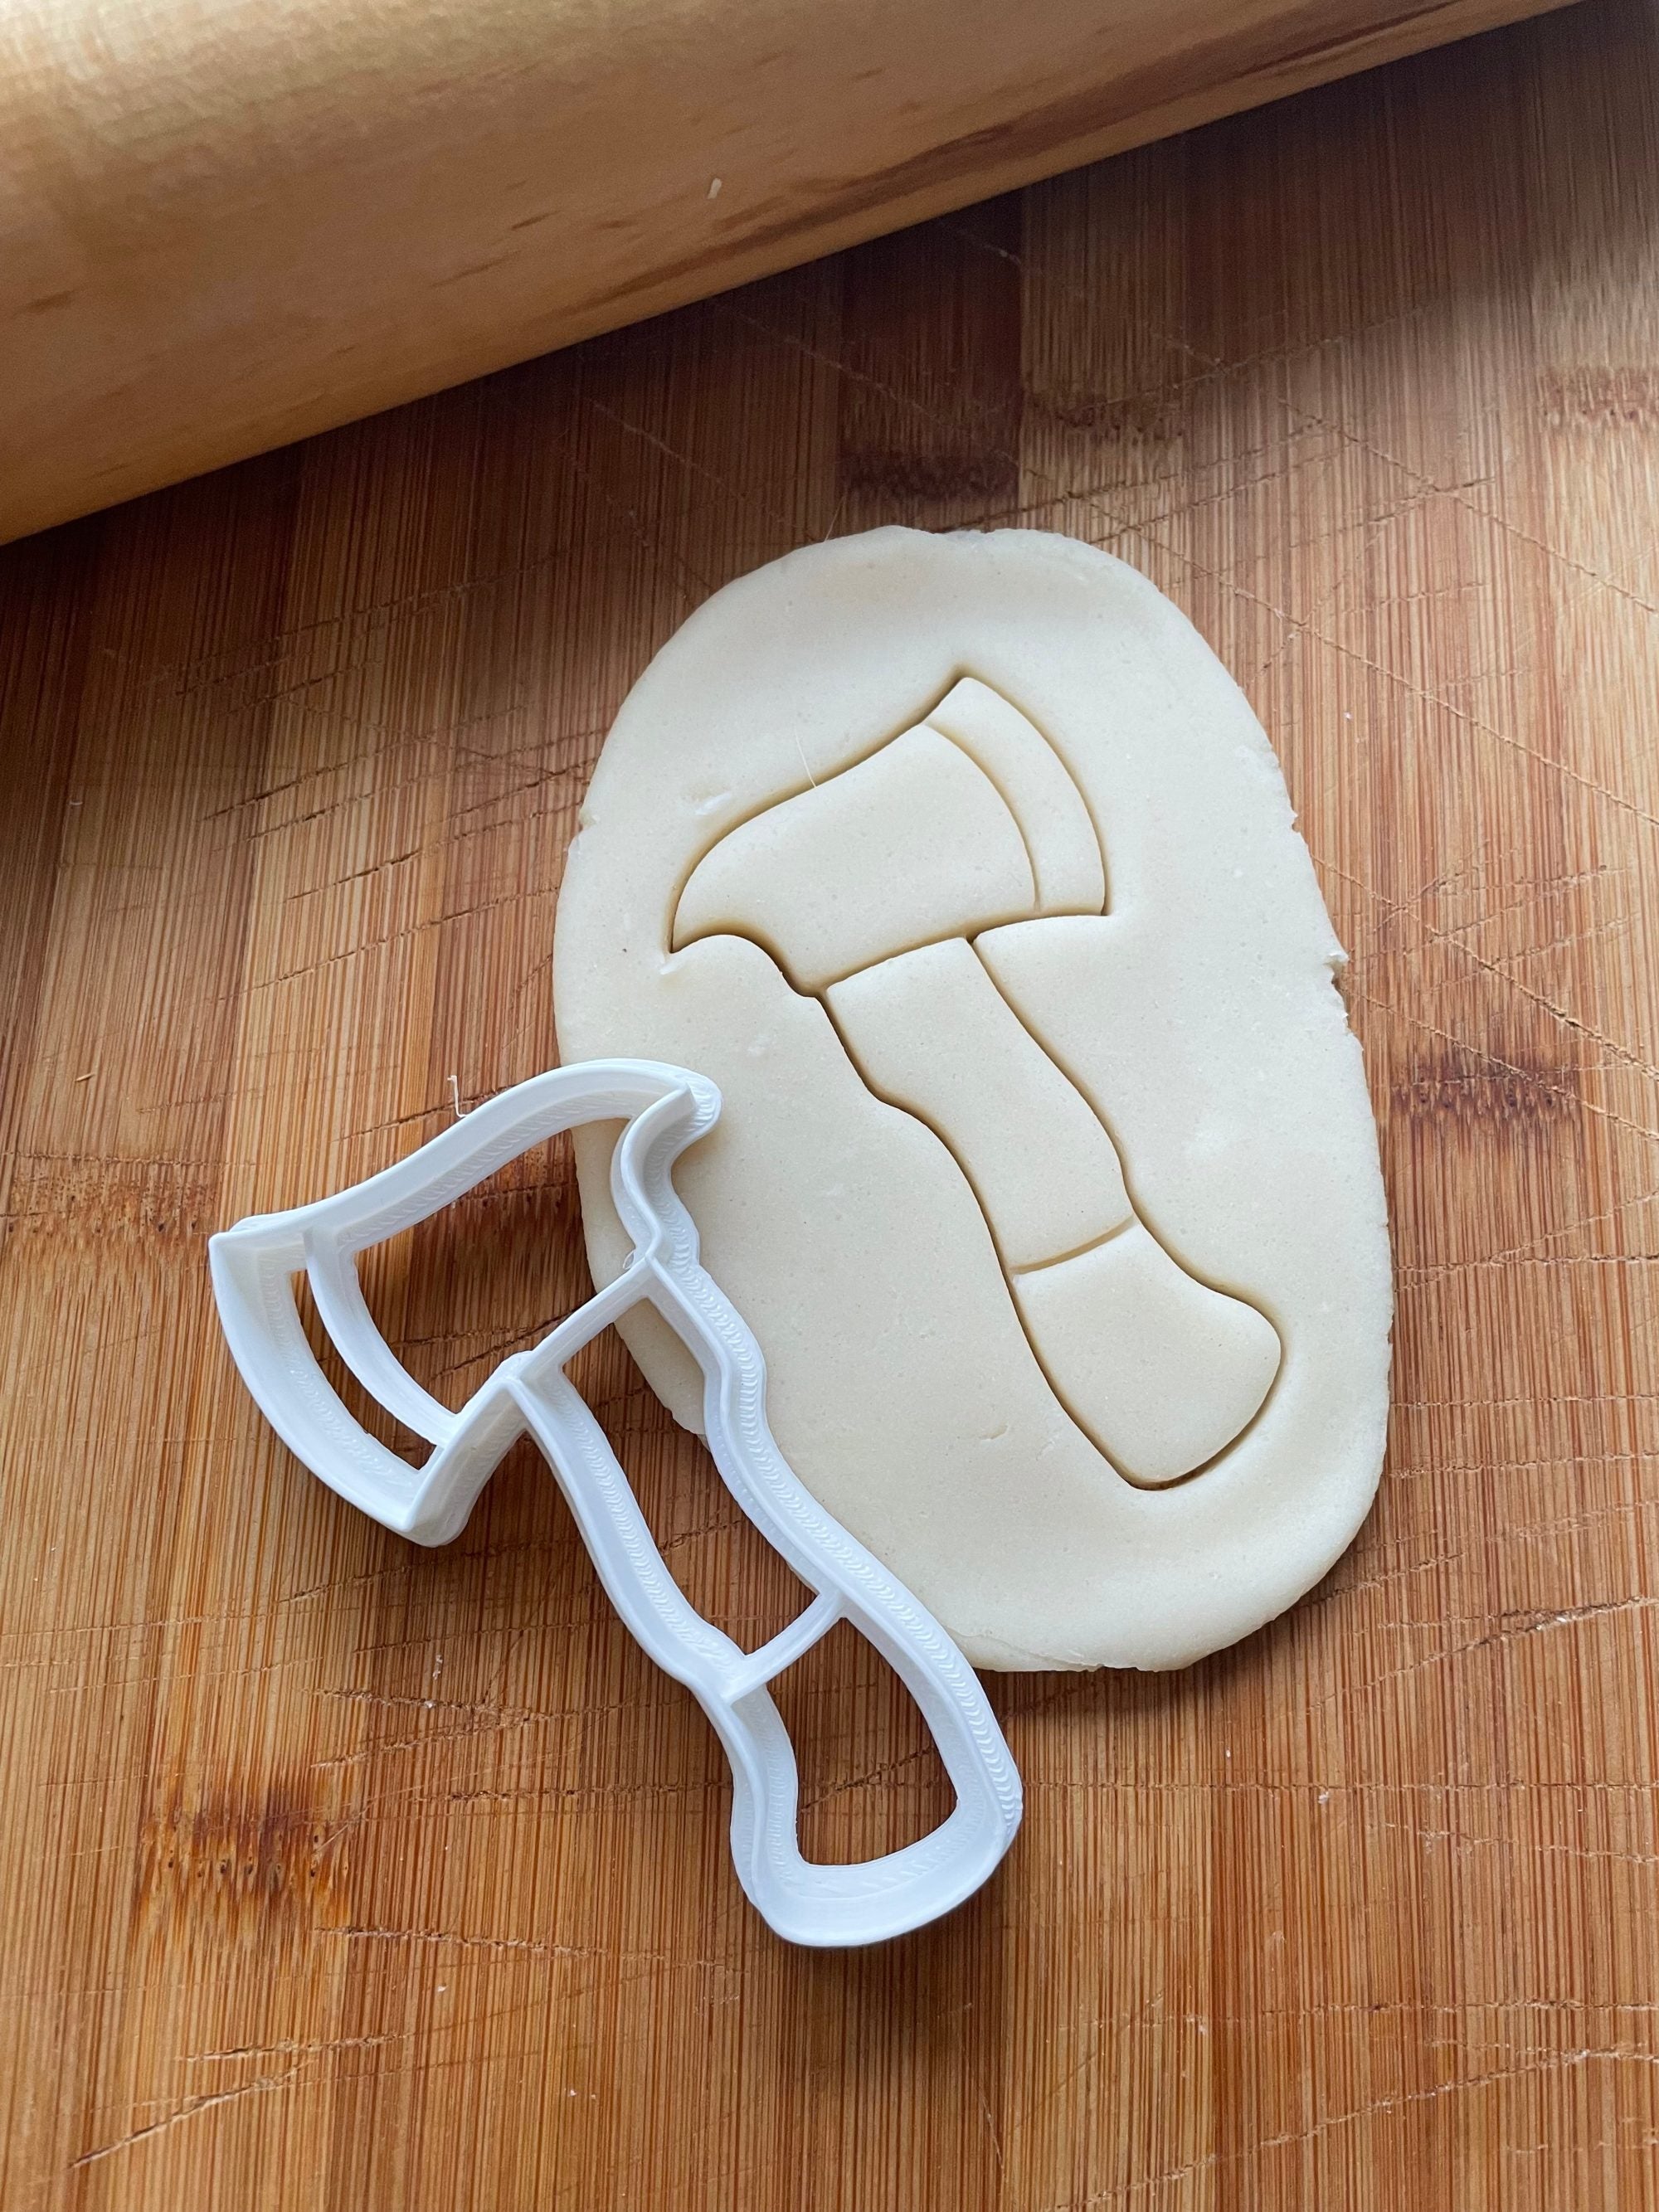 Fire Axe Cookie Cutter/Dishwasher Safe